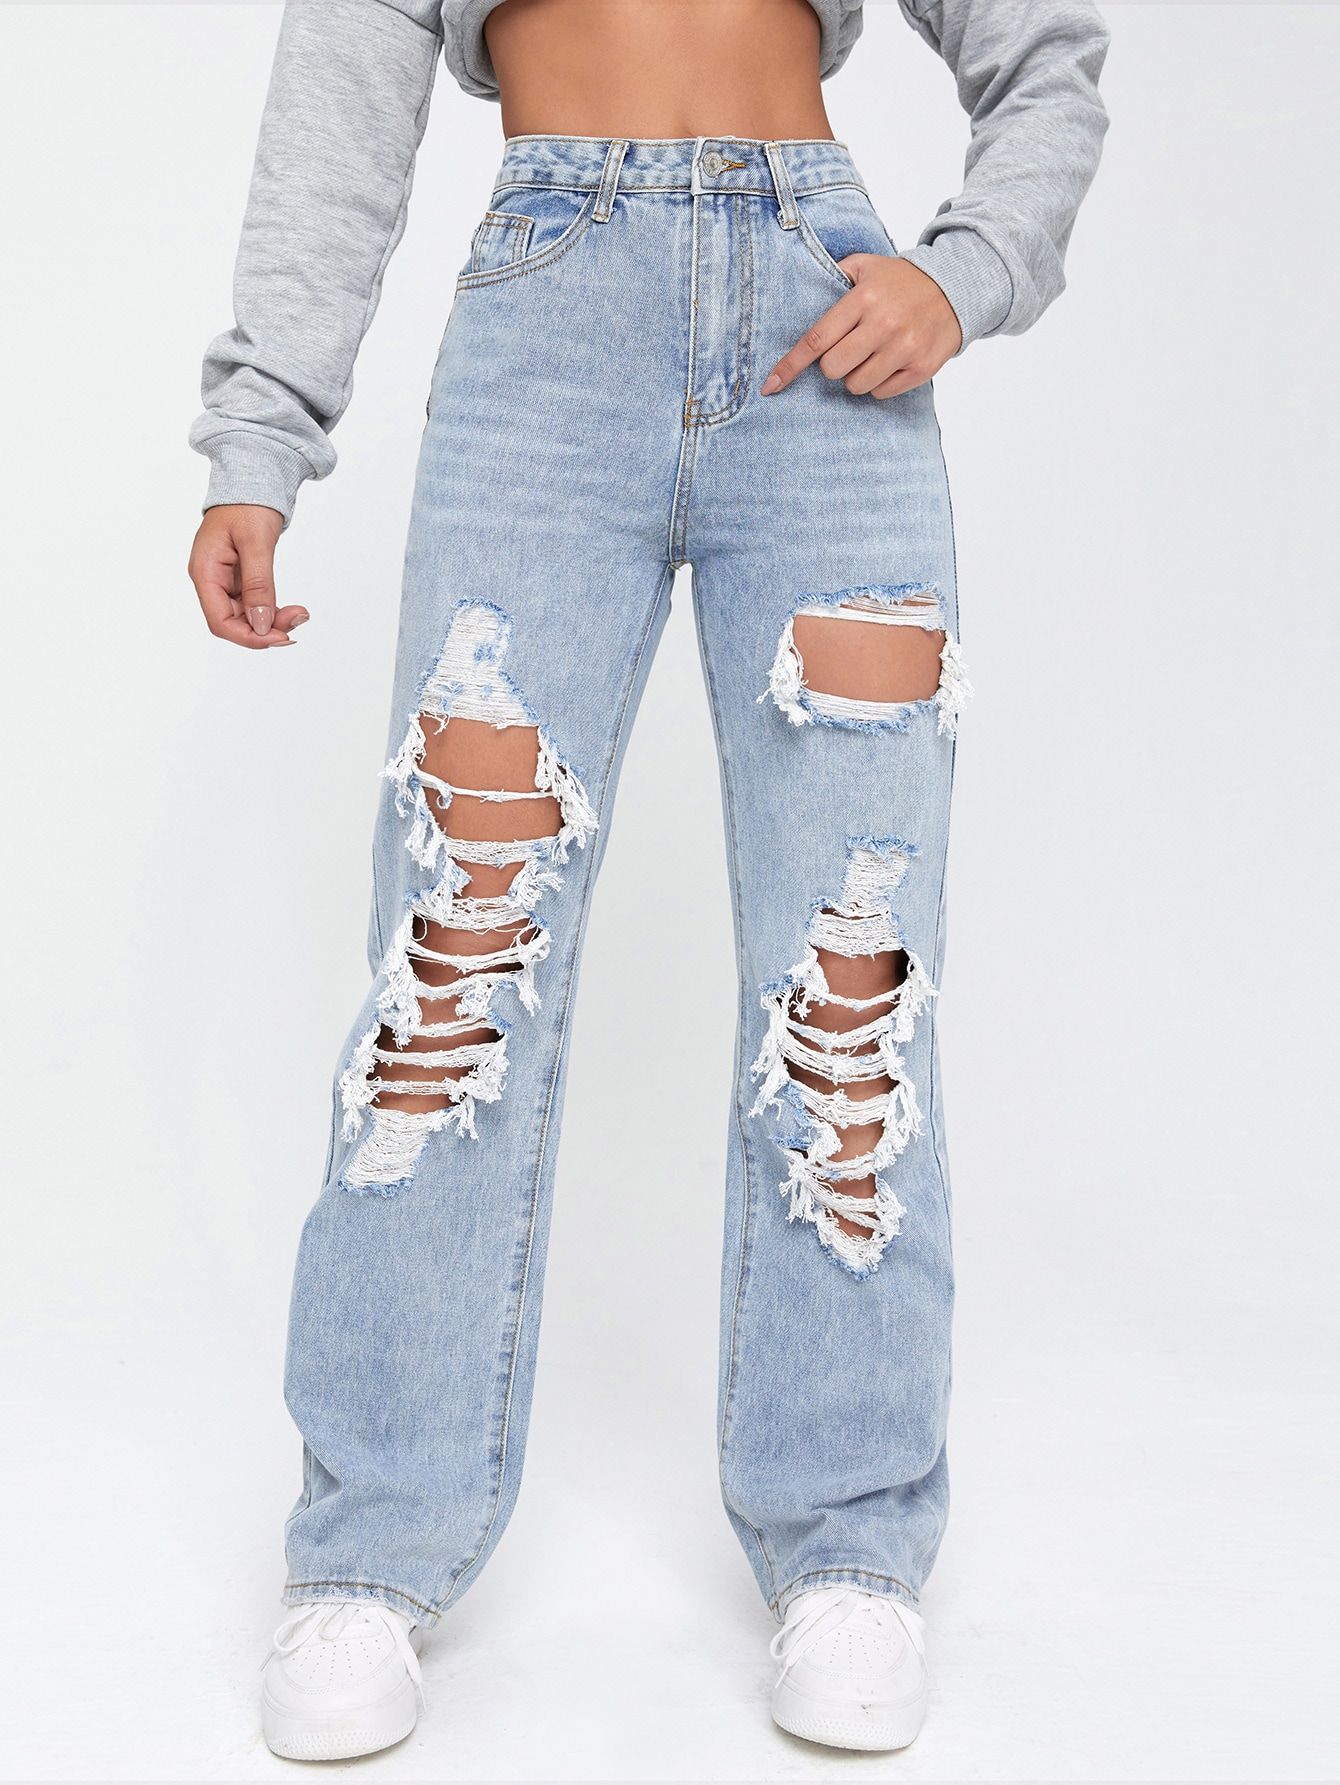 How to Wear Really Ripped Jeans: Top 13 Edgy & Stylish Outfits for Women